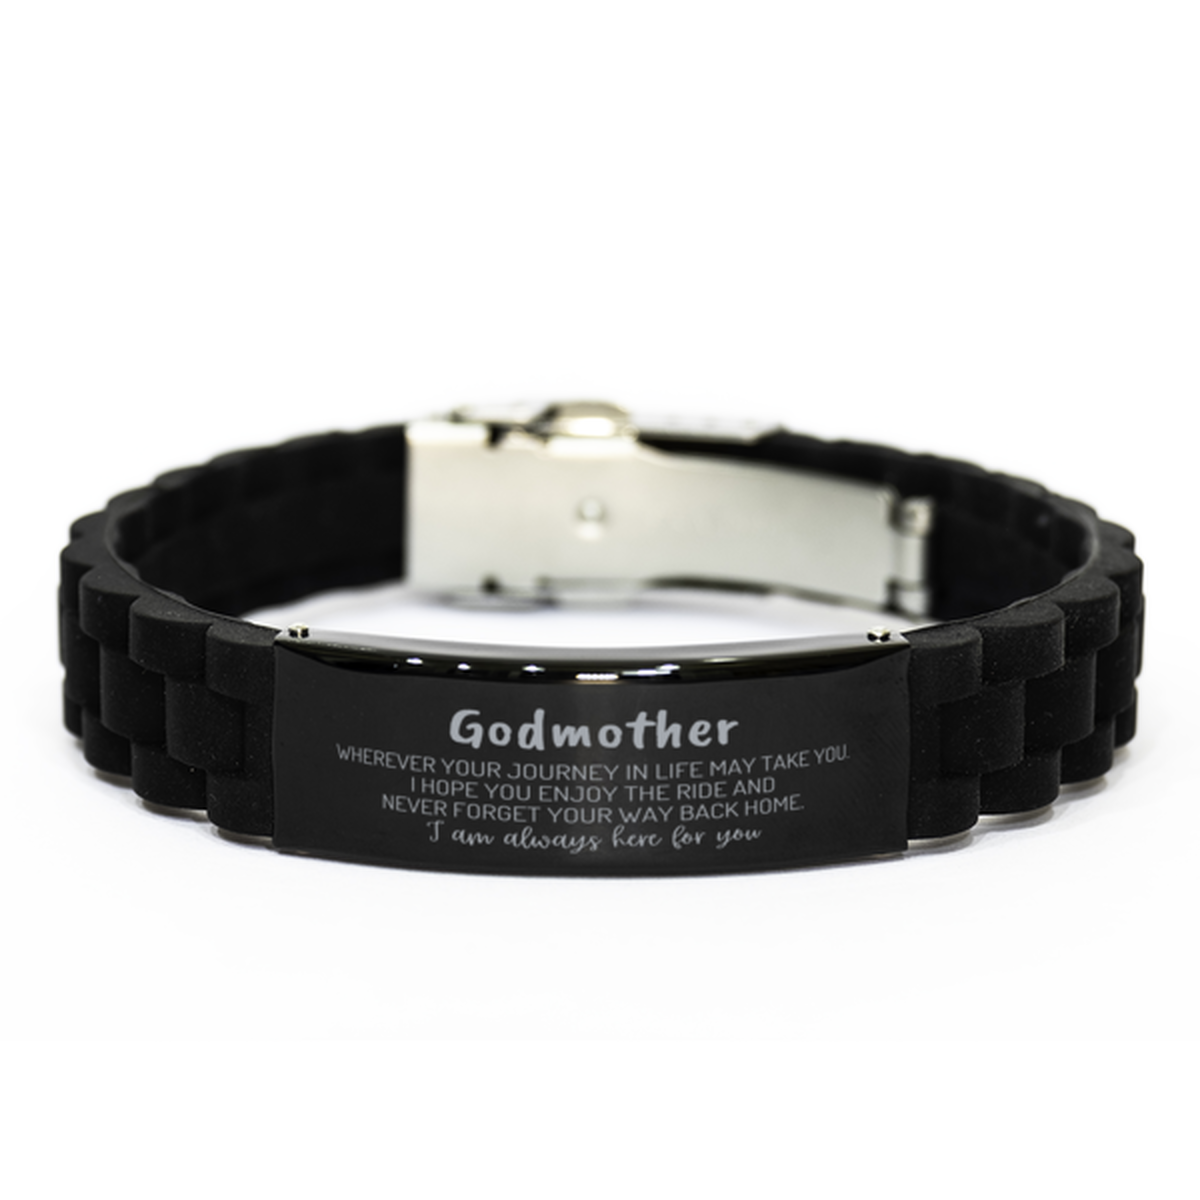 Godmother wherever your journey in life may take you, I am always here for you Godmother Black Glidelock Clasp Bracelet, Awesome Christmas Gifts For Godmother, Godmother Birthday Gifts for Men Women Family Loved One